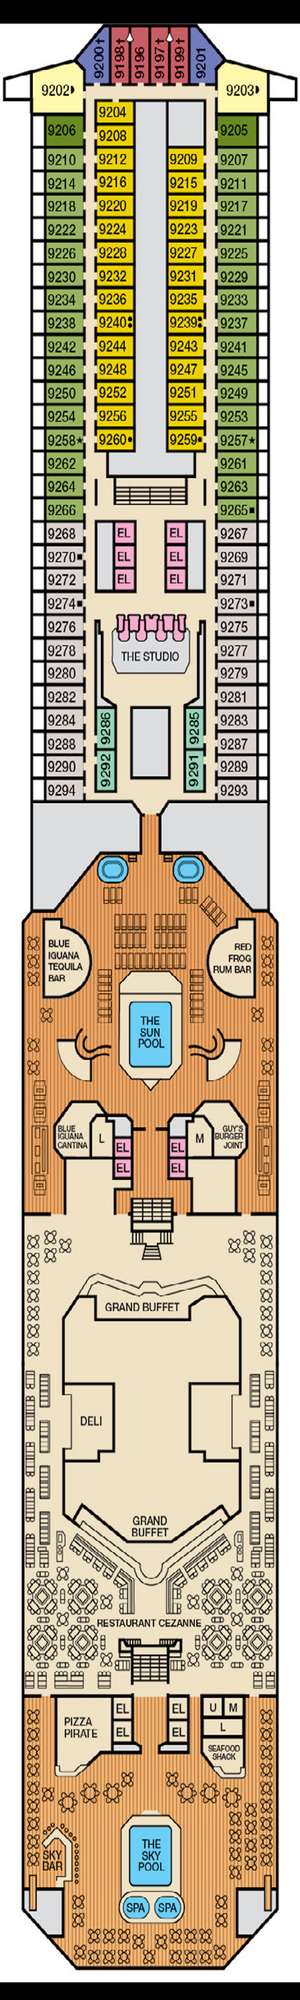 Deck plan for Carnival Conquest